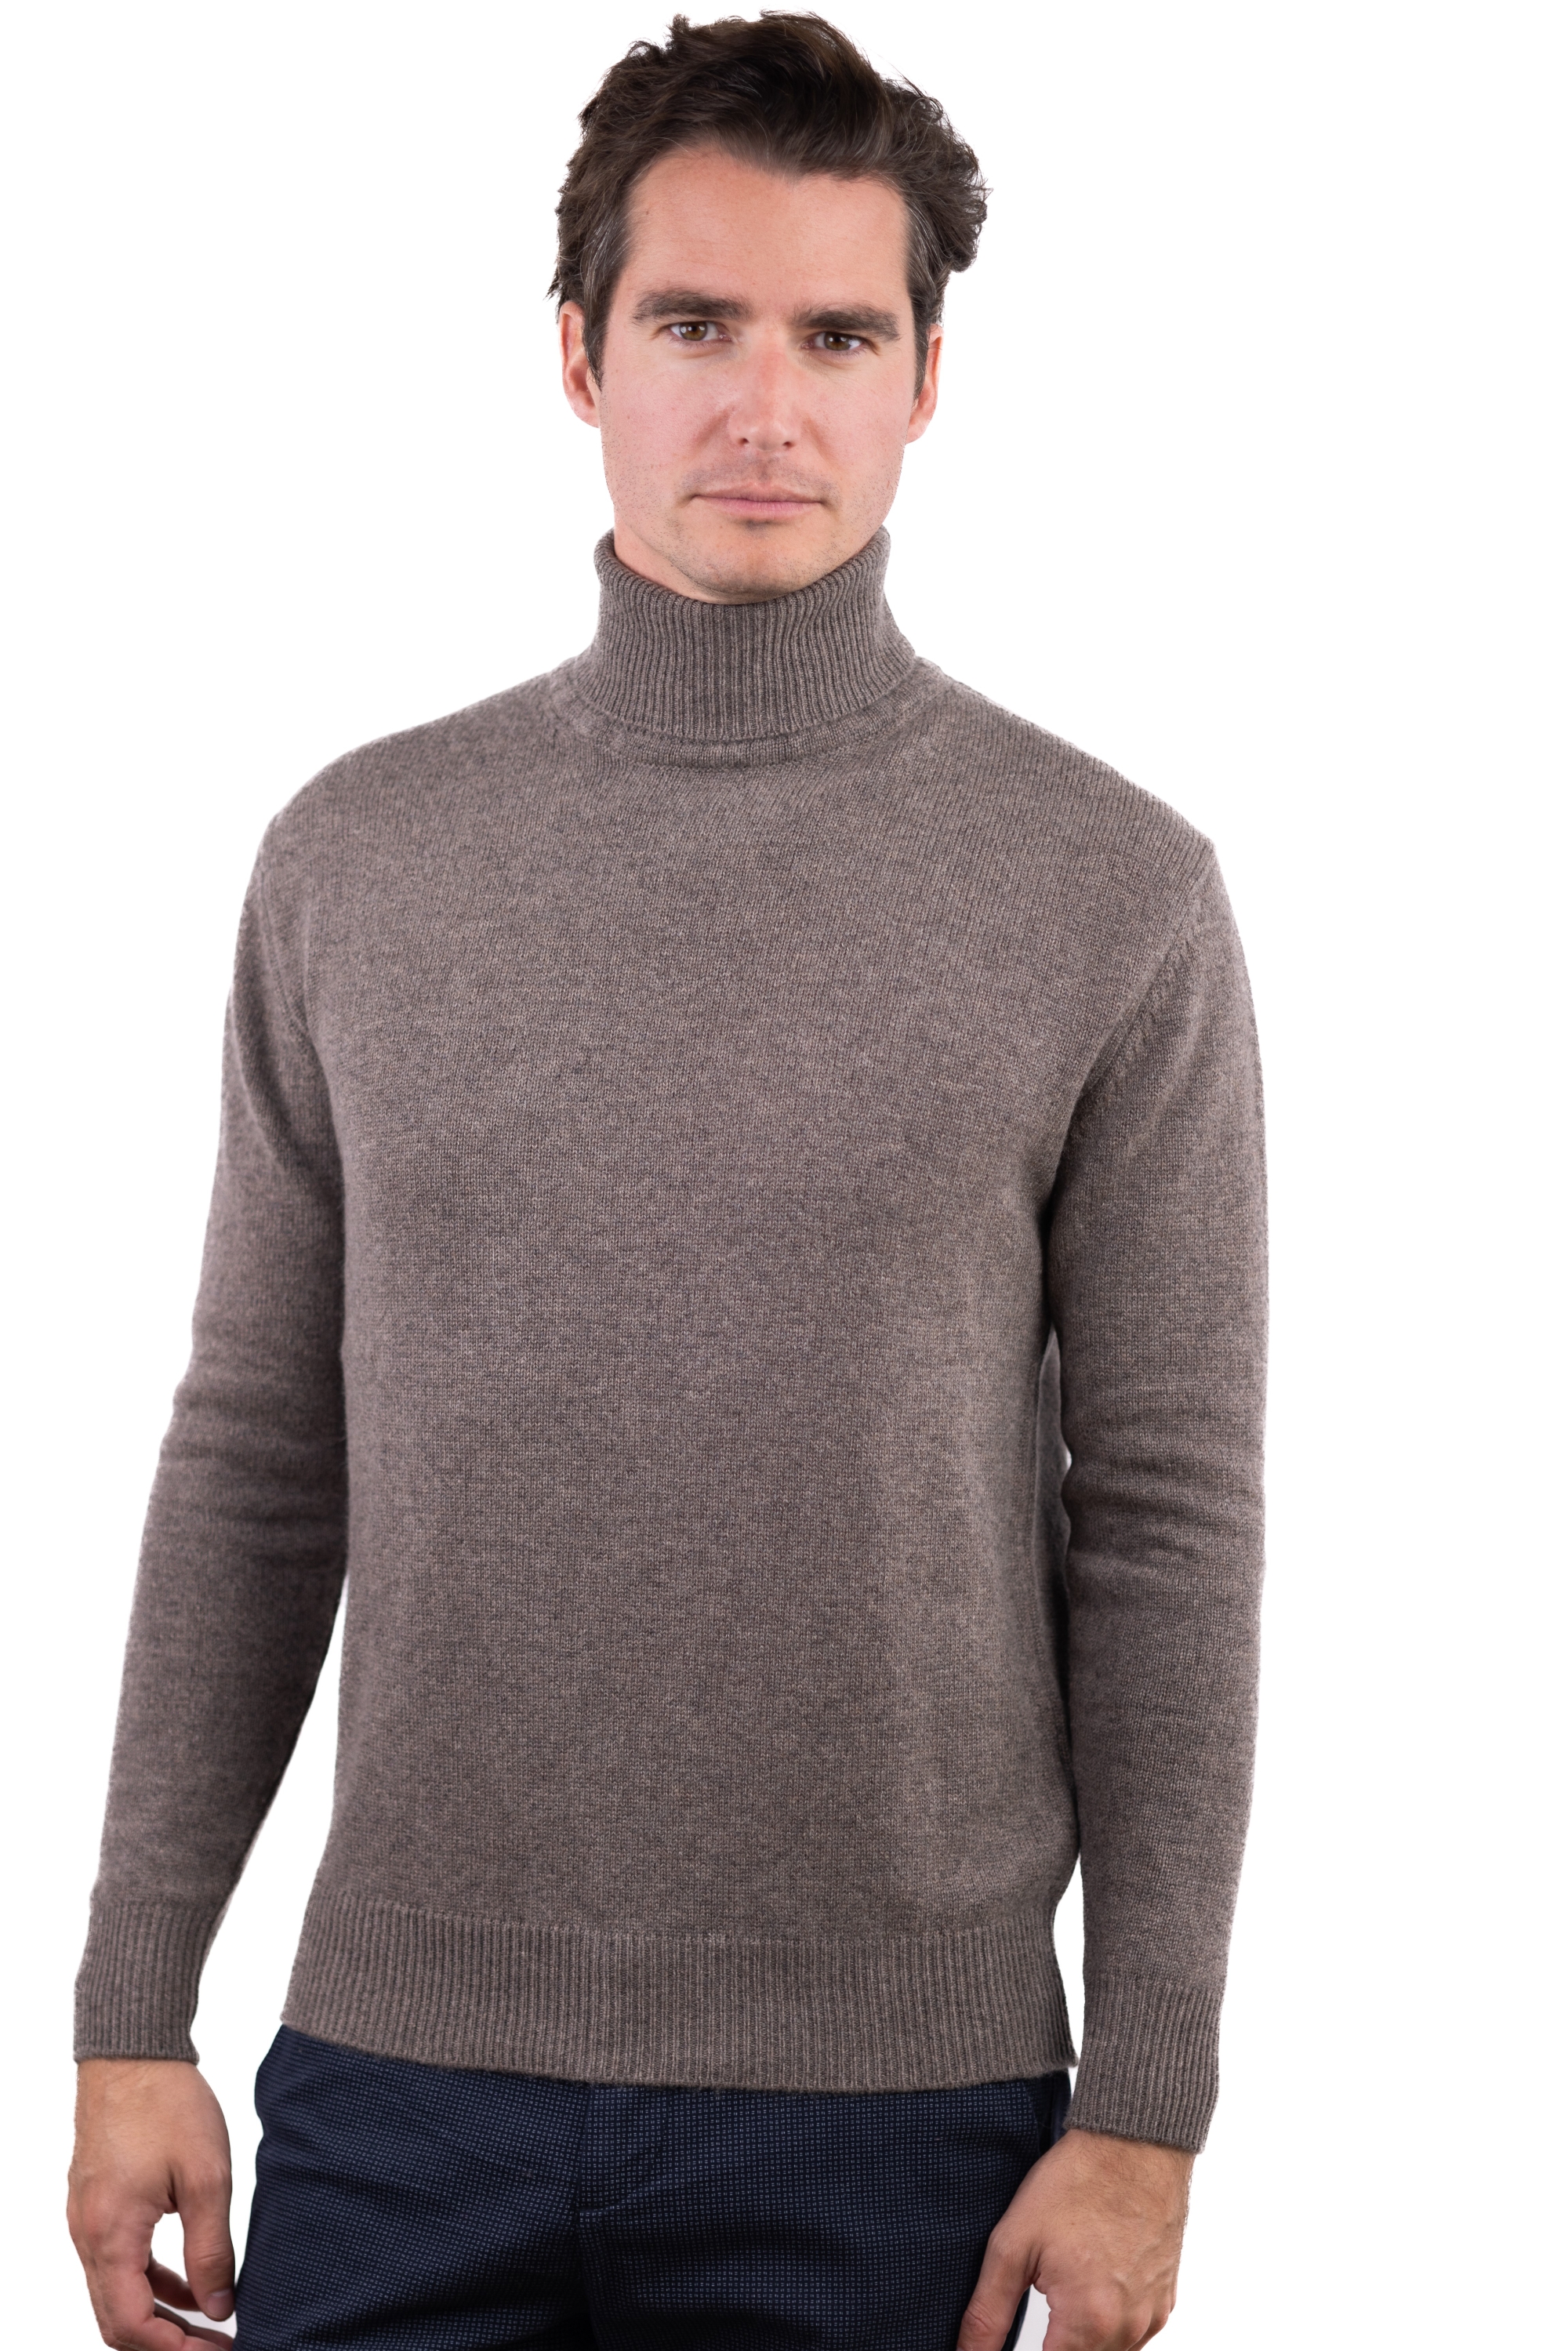 Cashmere men basic sweaters at low prices torino first otter l